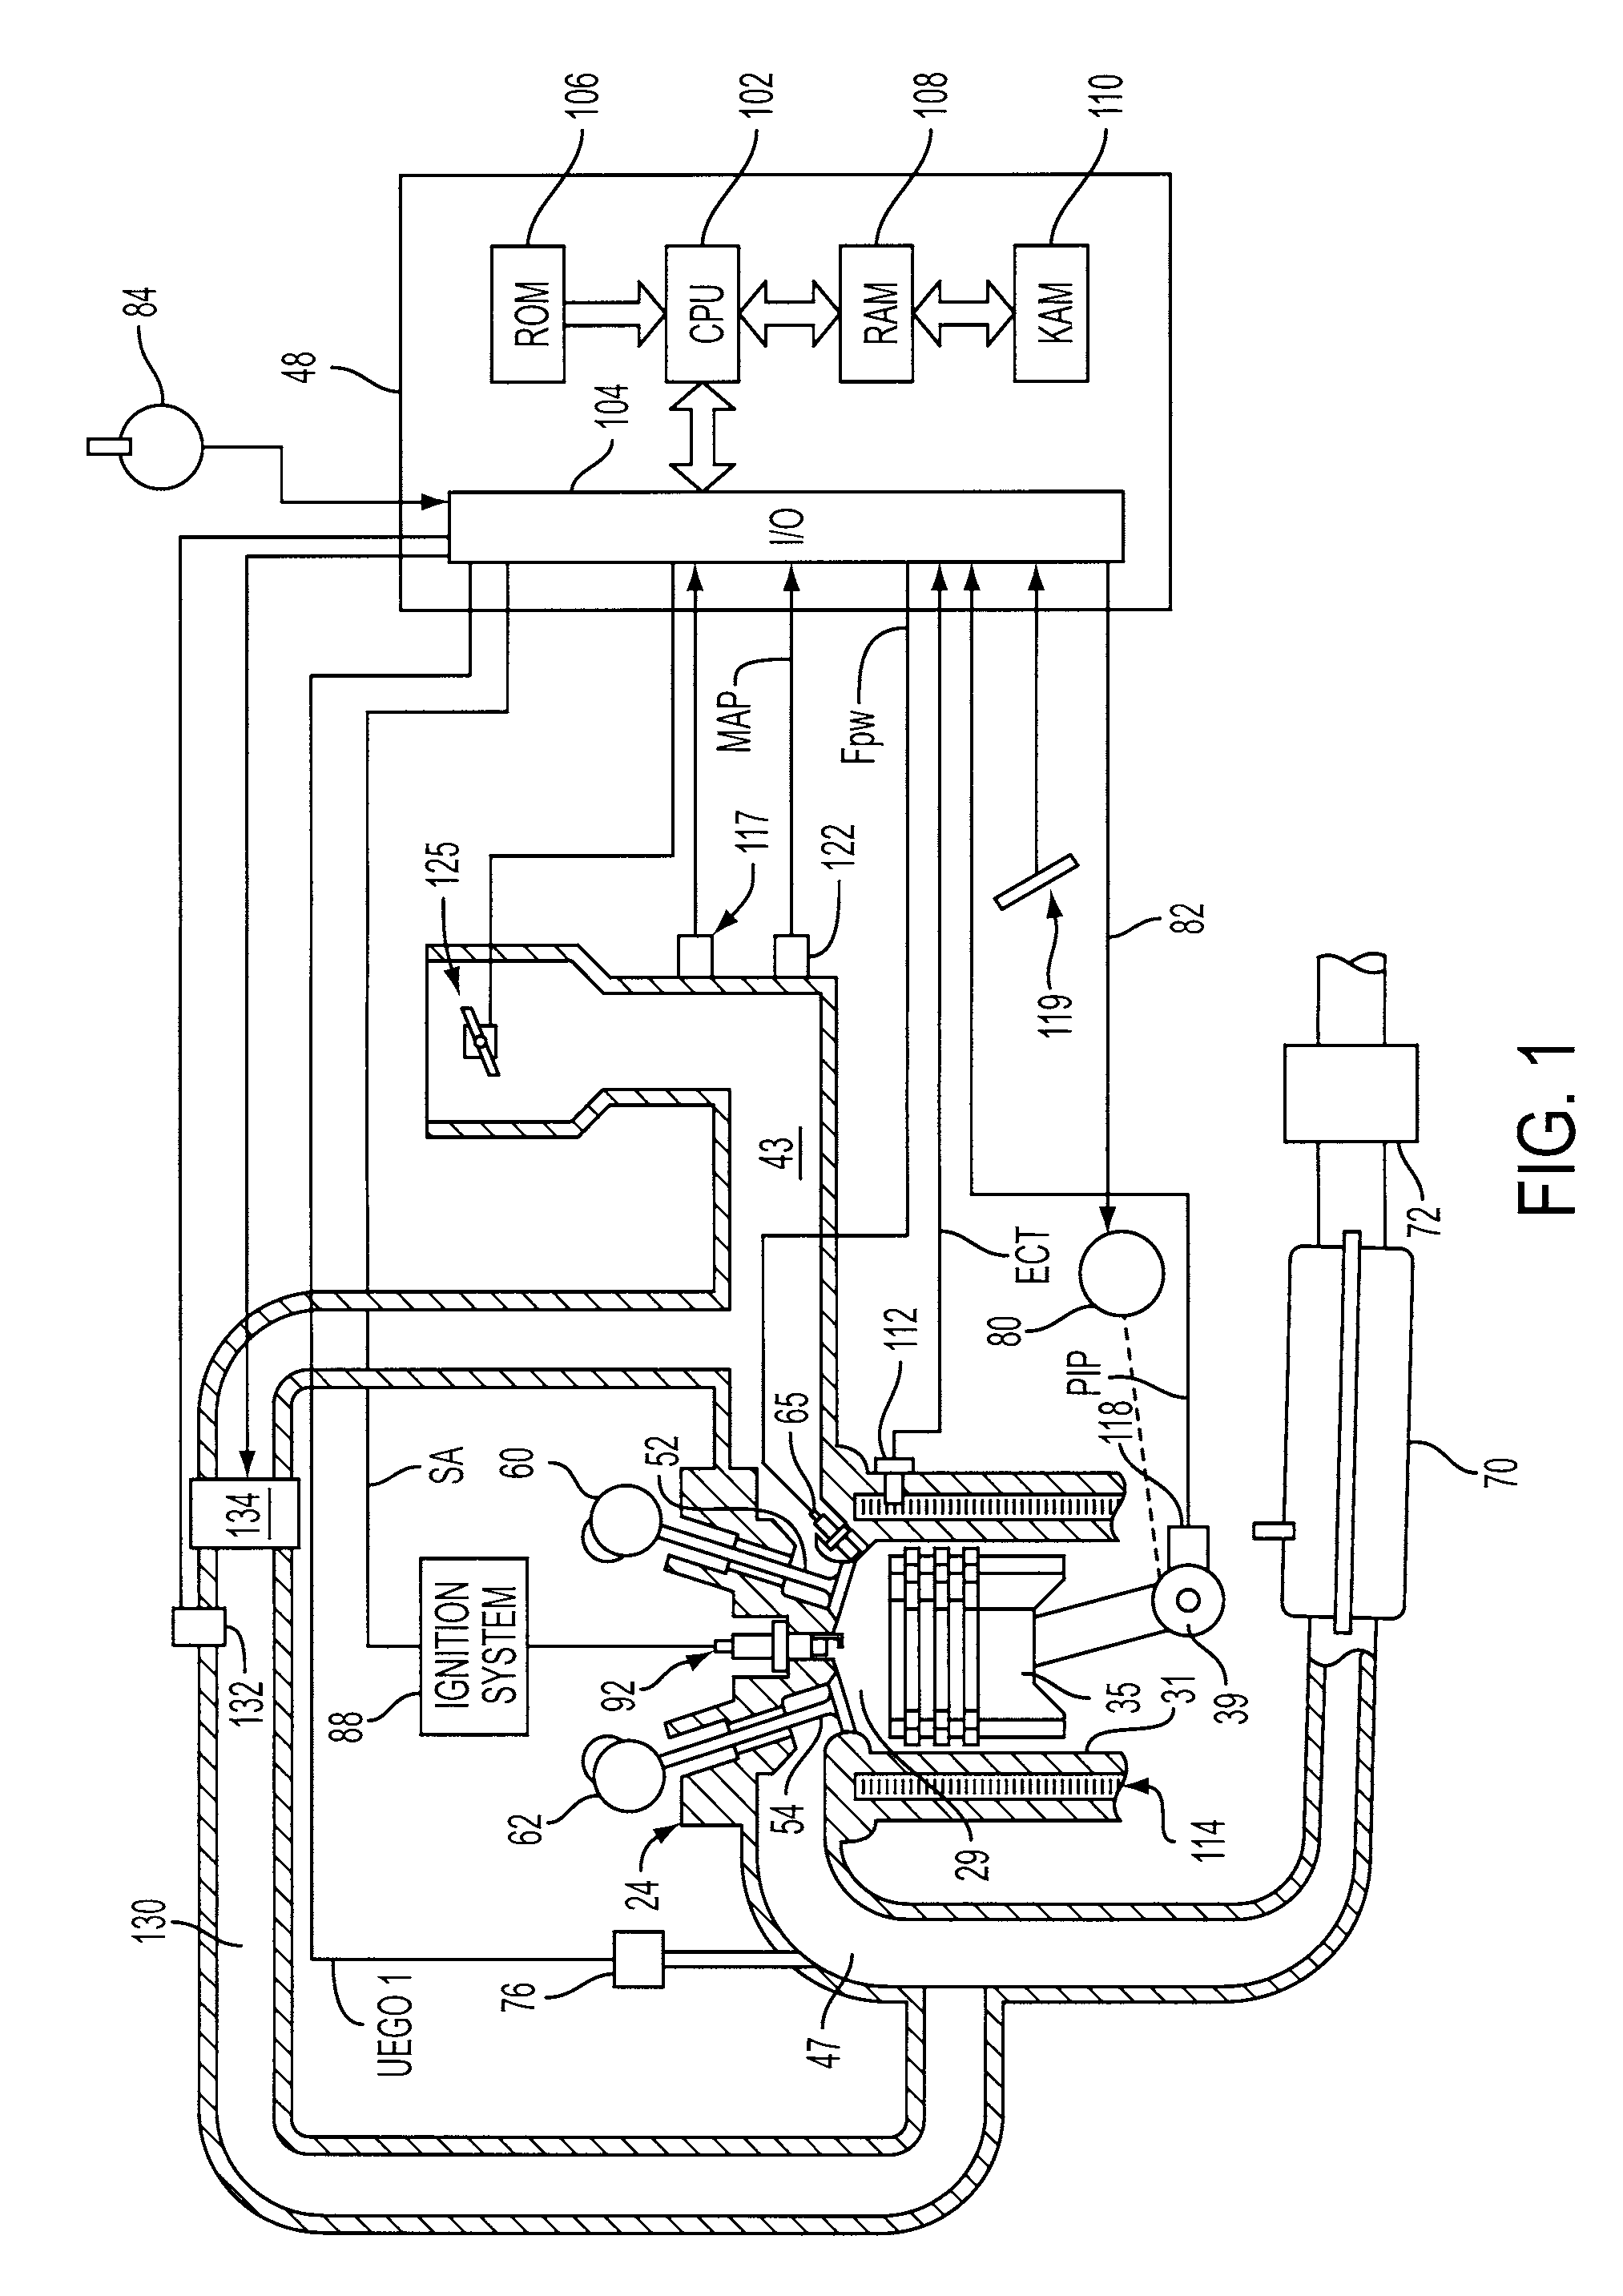 System and Method for Operation of an Engine Having Multiple Combustion Modes and Adjustable Balance Shafts